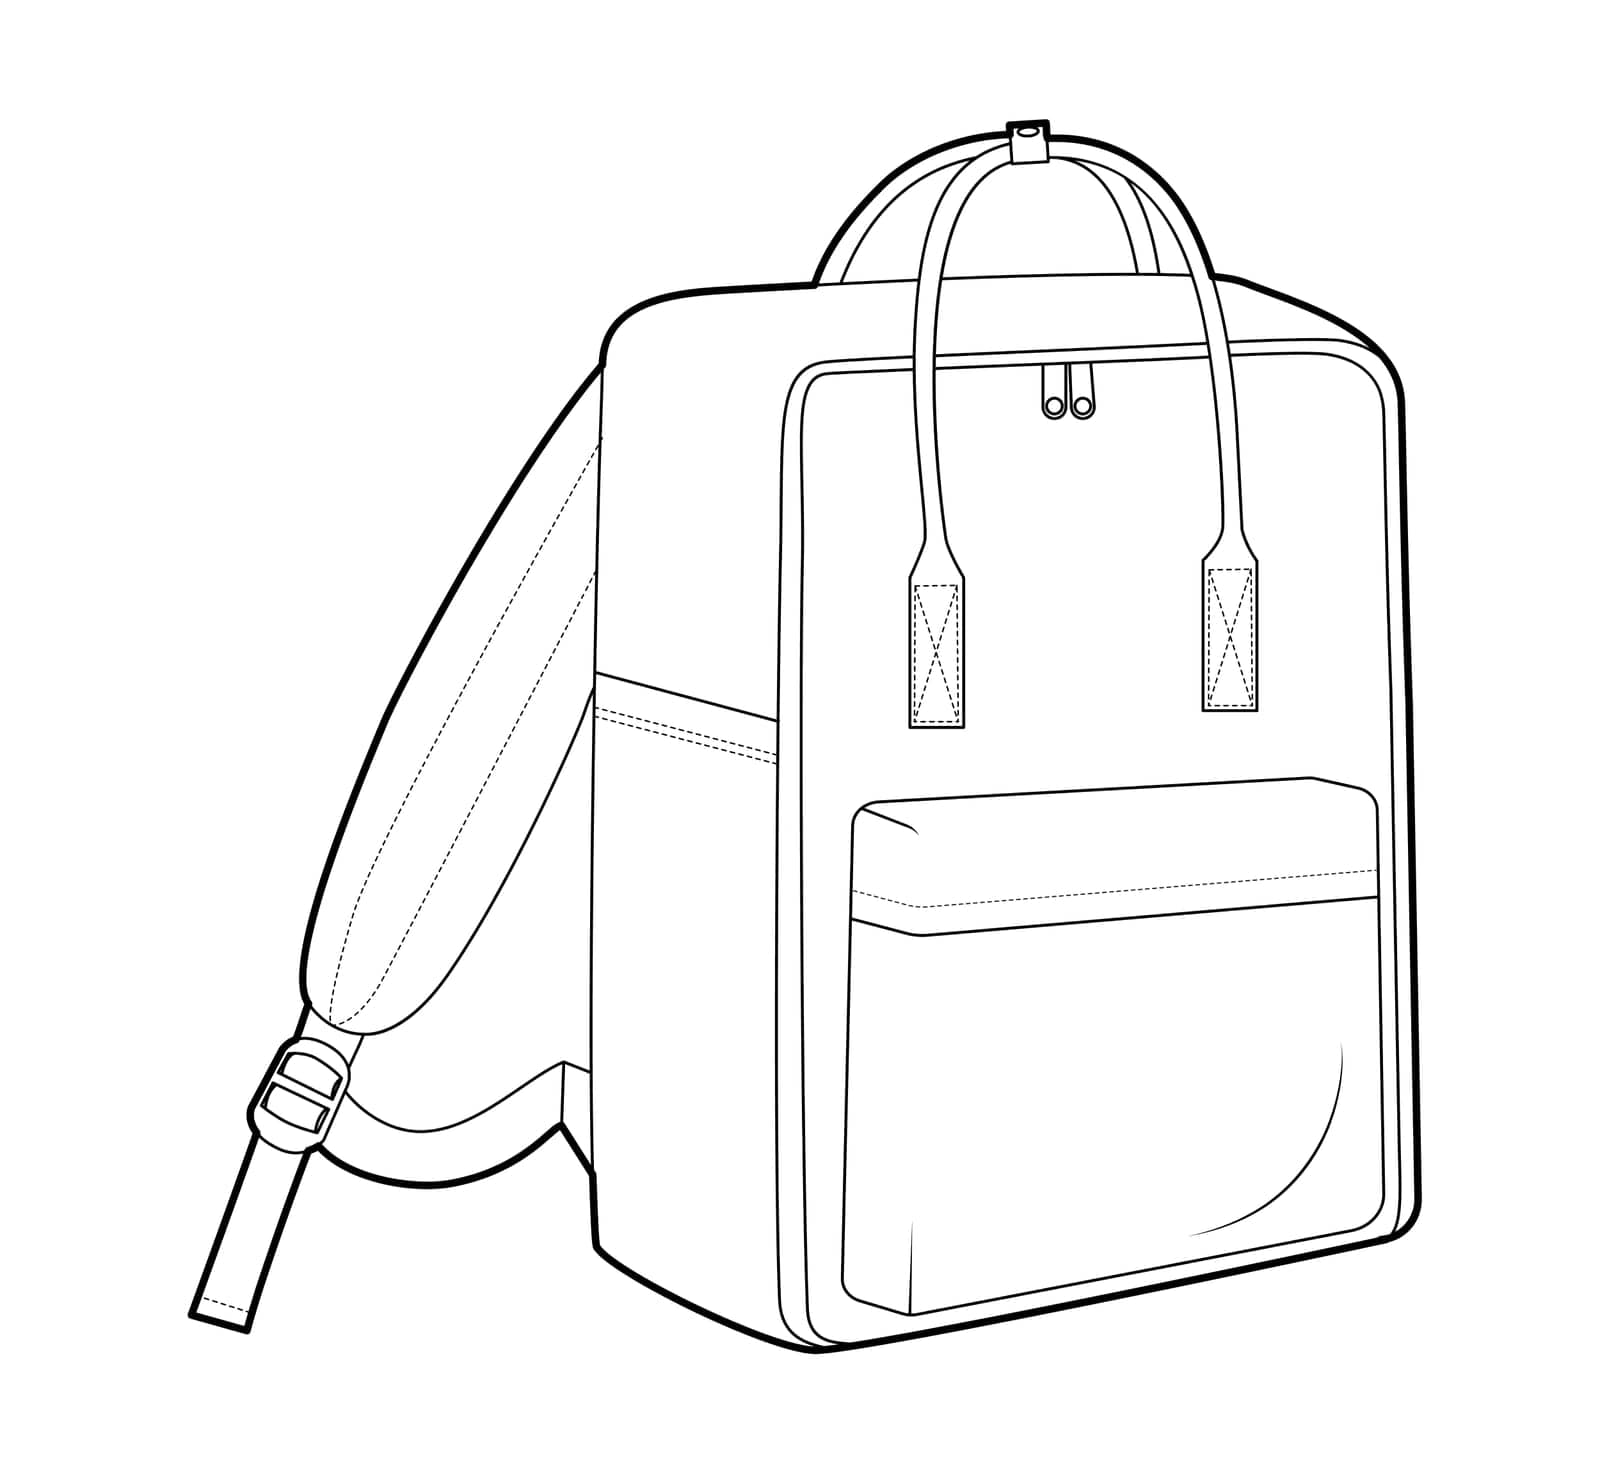 Adventure backpack silhouette bag with handle. Fashion accessory technical illustration. Vector schoolbag 3-4 view by Vectoressa